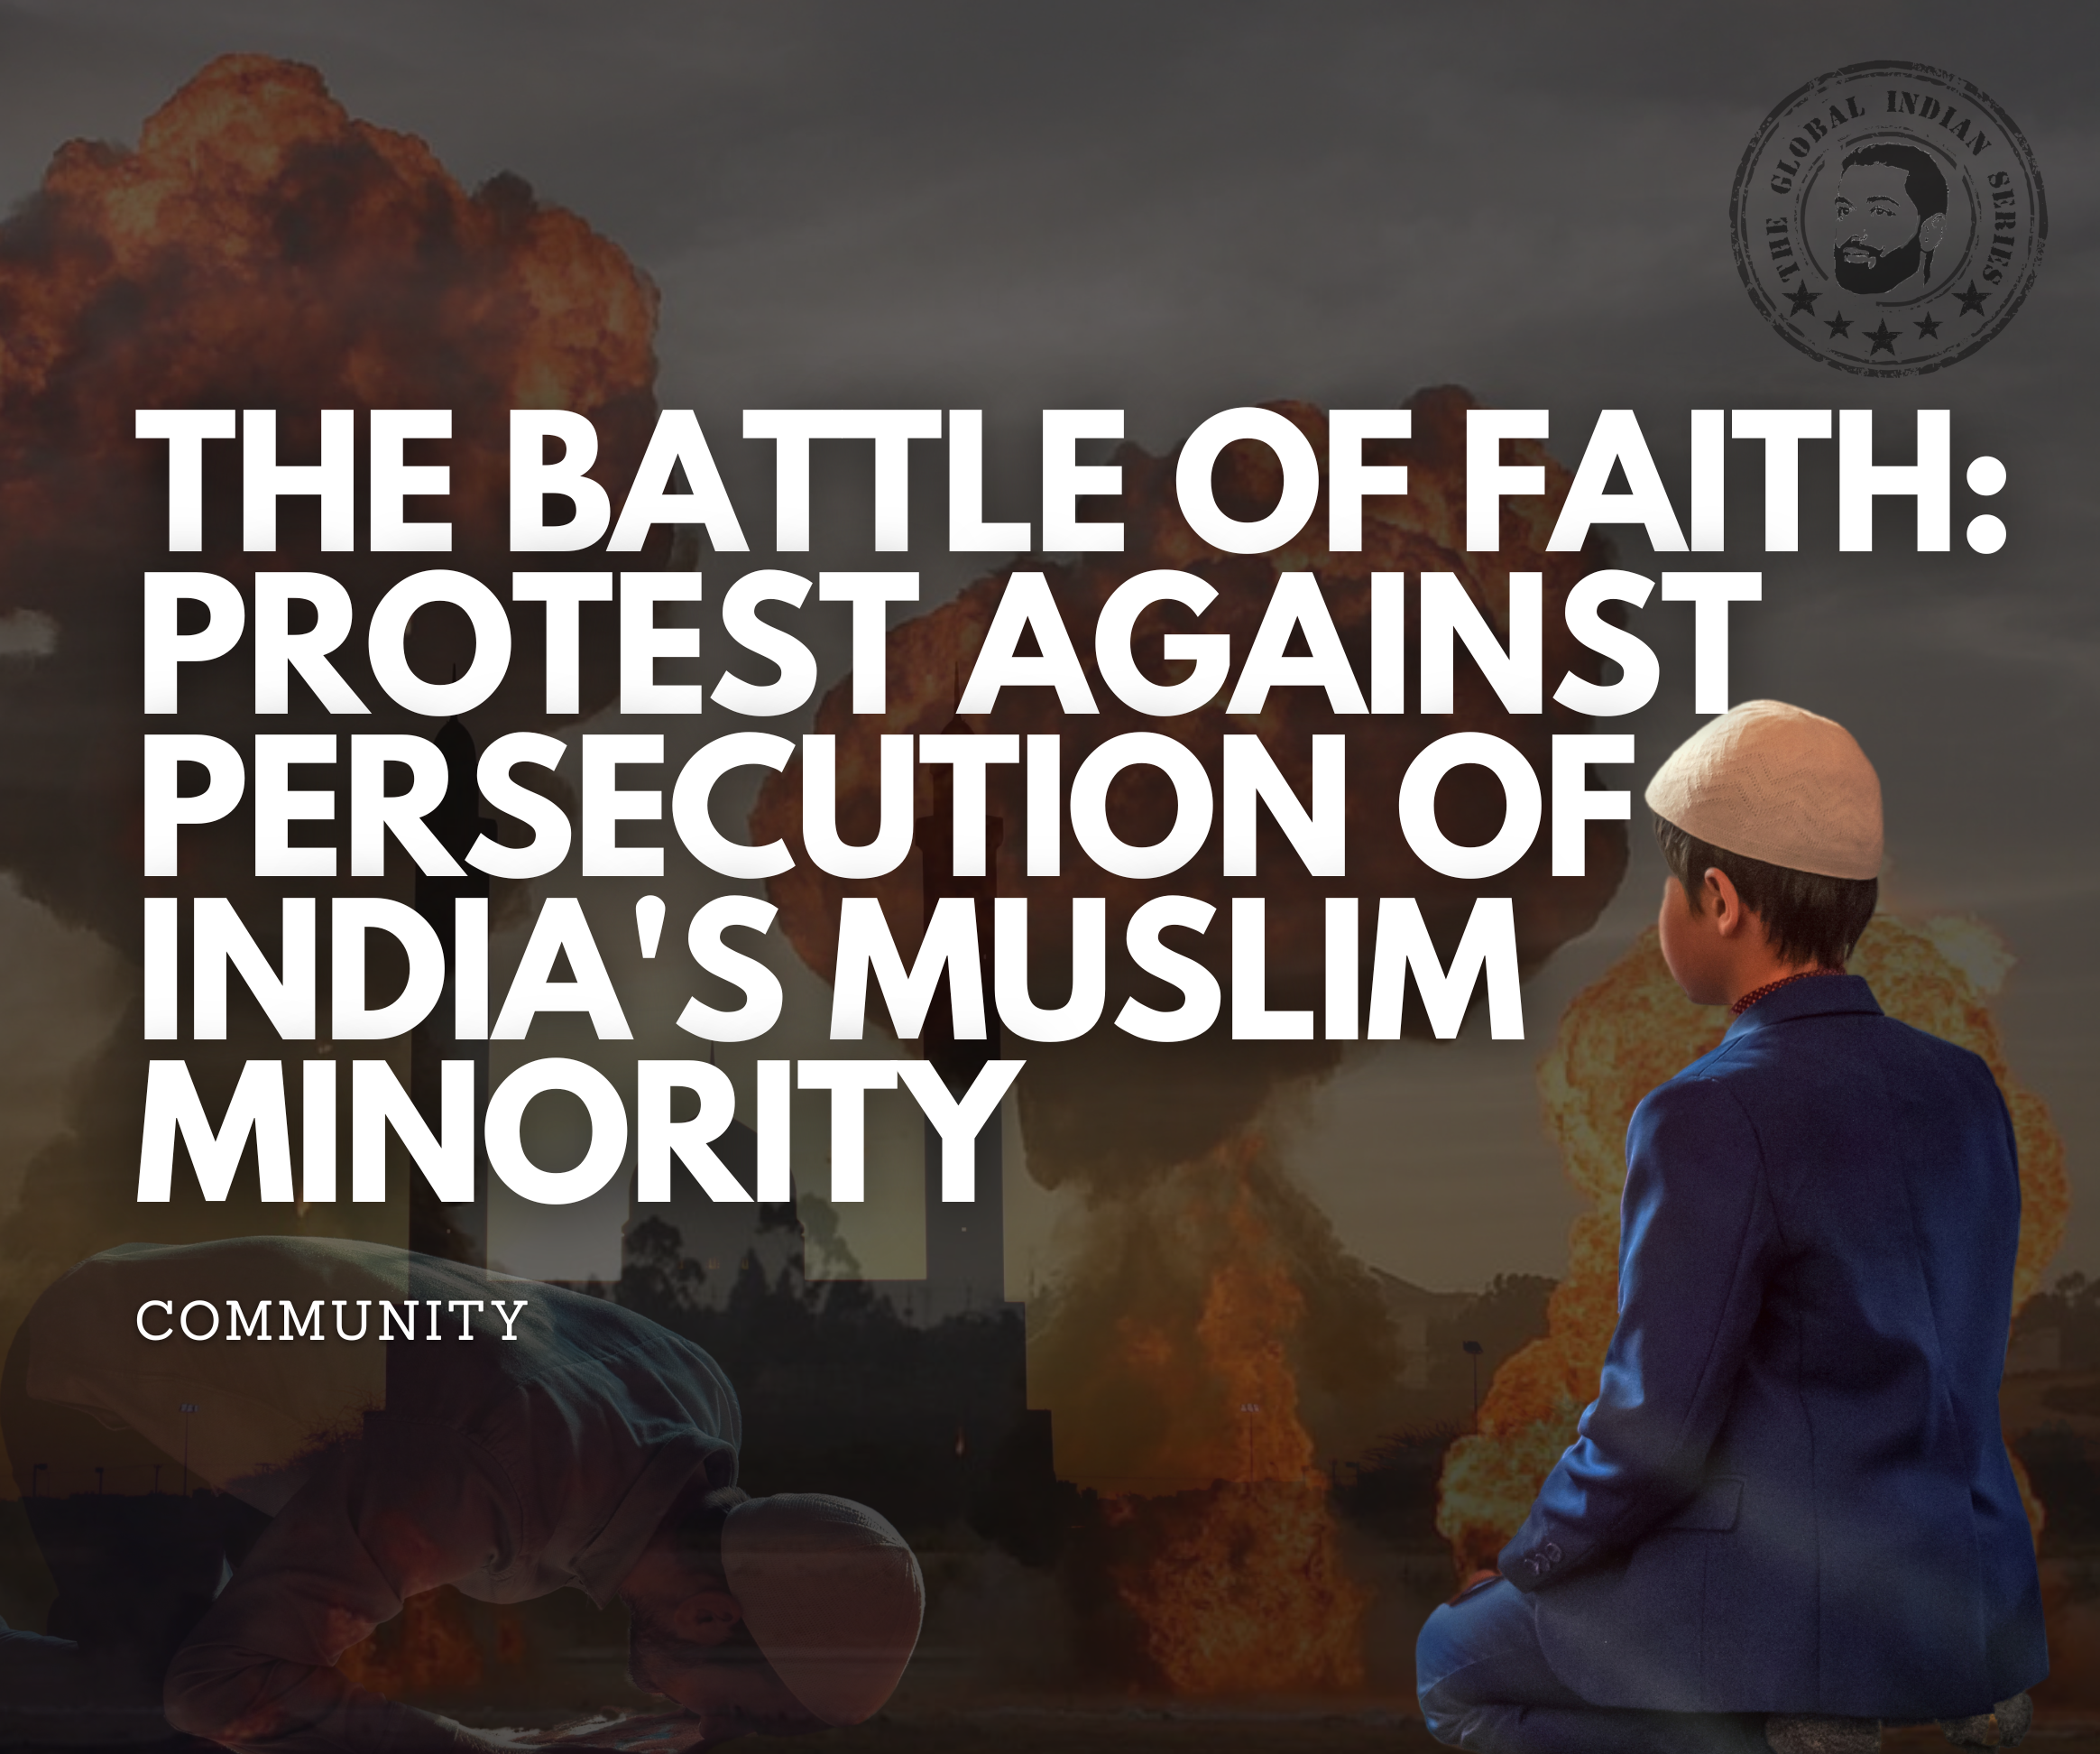 The battle of faith: Protest Against Persecution of India’s Muslim minority